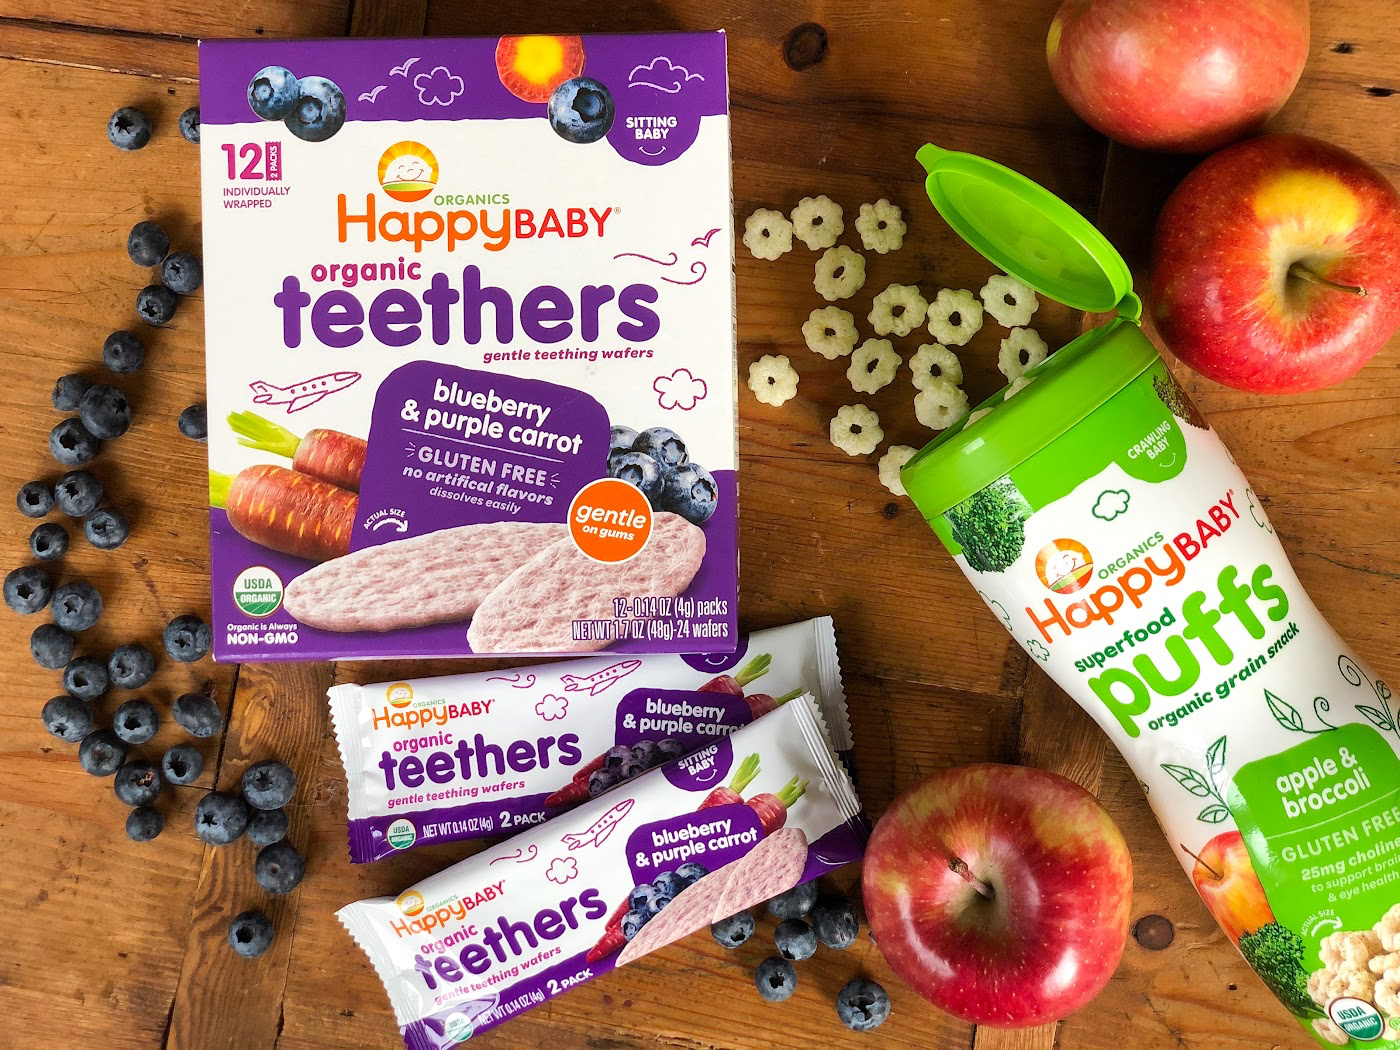 Happy Baby Organic Teethers Are Just $1.24 At Kroger